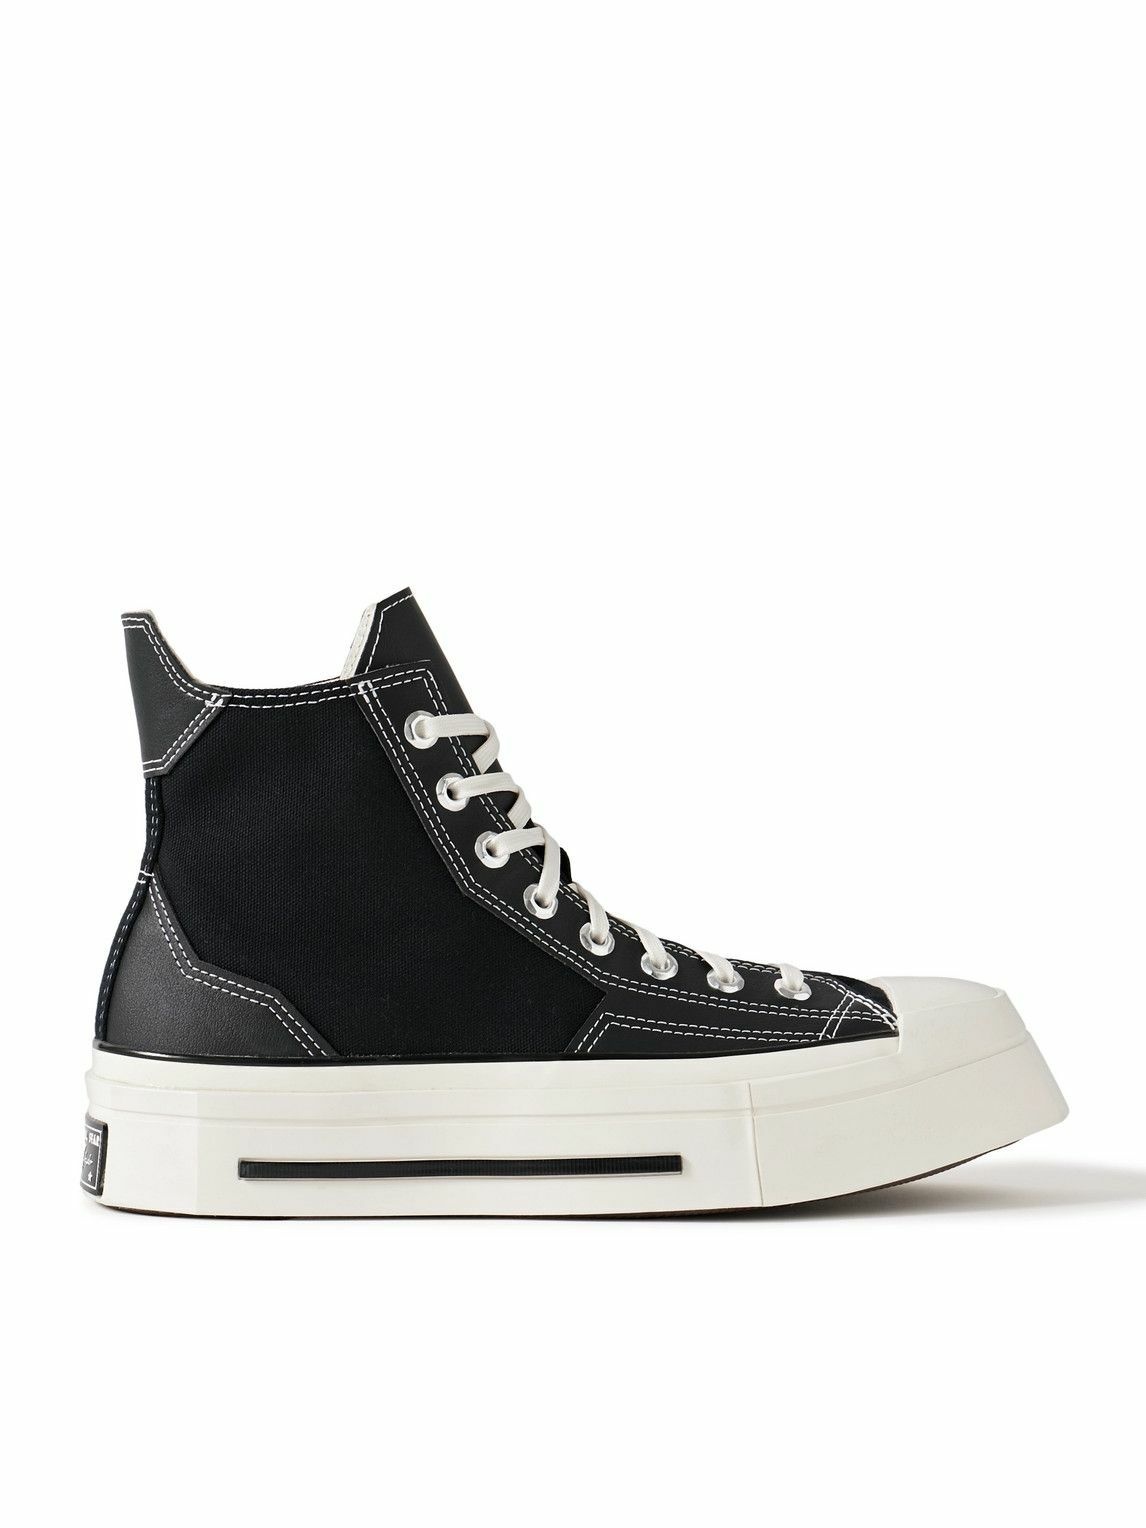 Photo: Converse - Chuck 70 De Luxe Leather and Canvas Platform High-Top Sneakers - Black